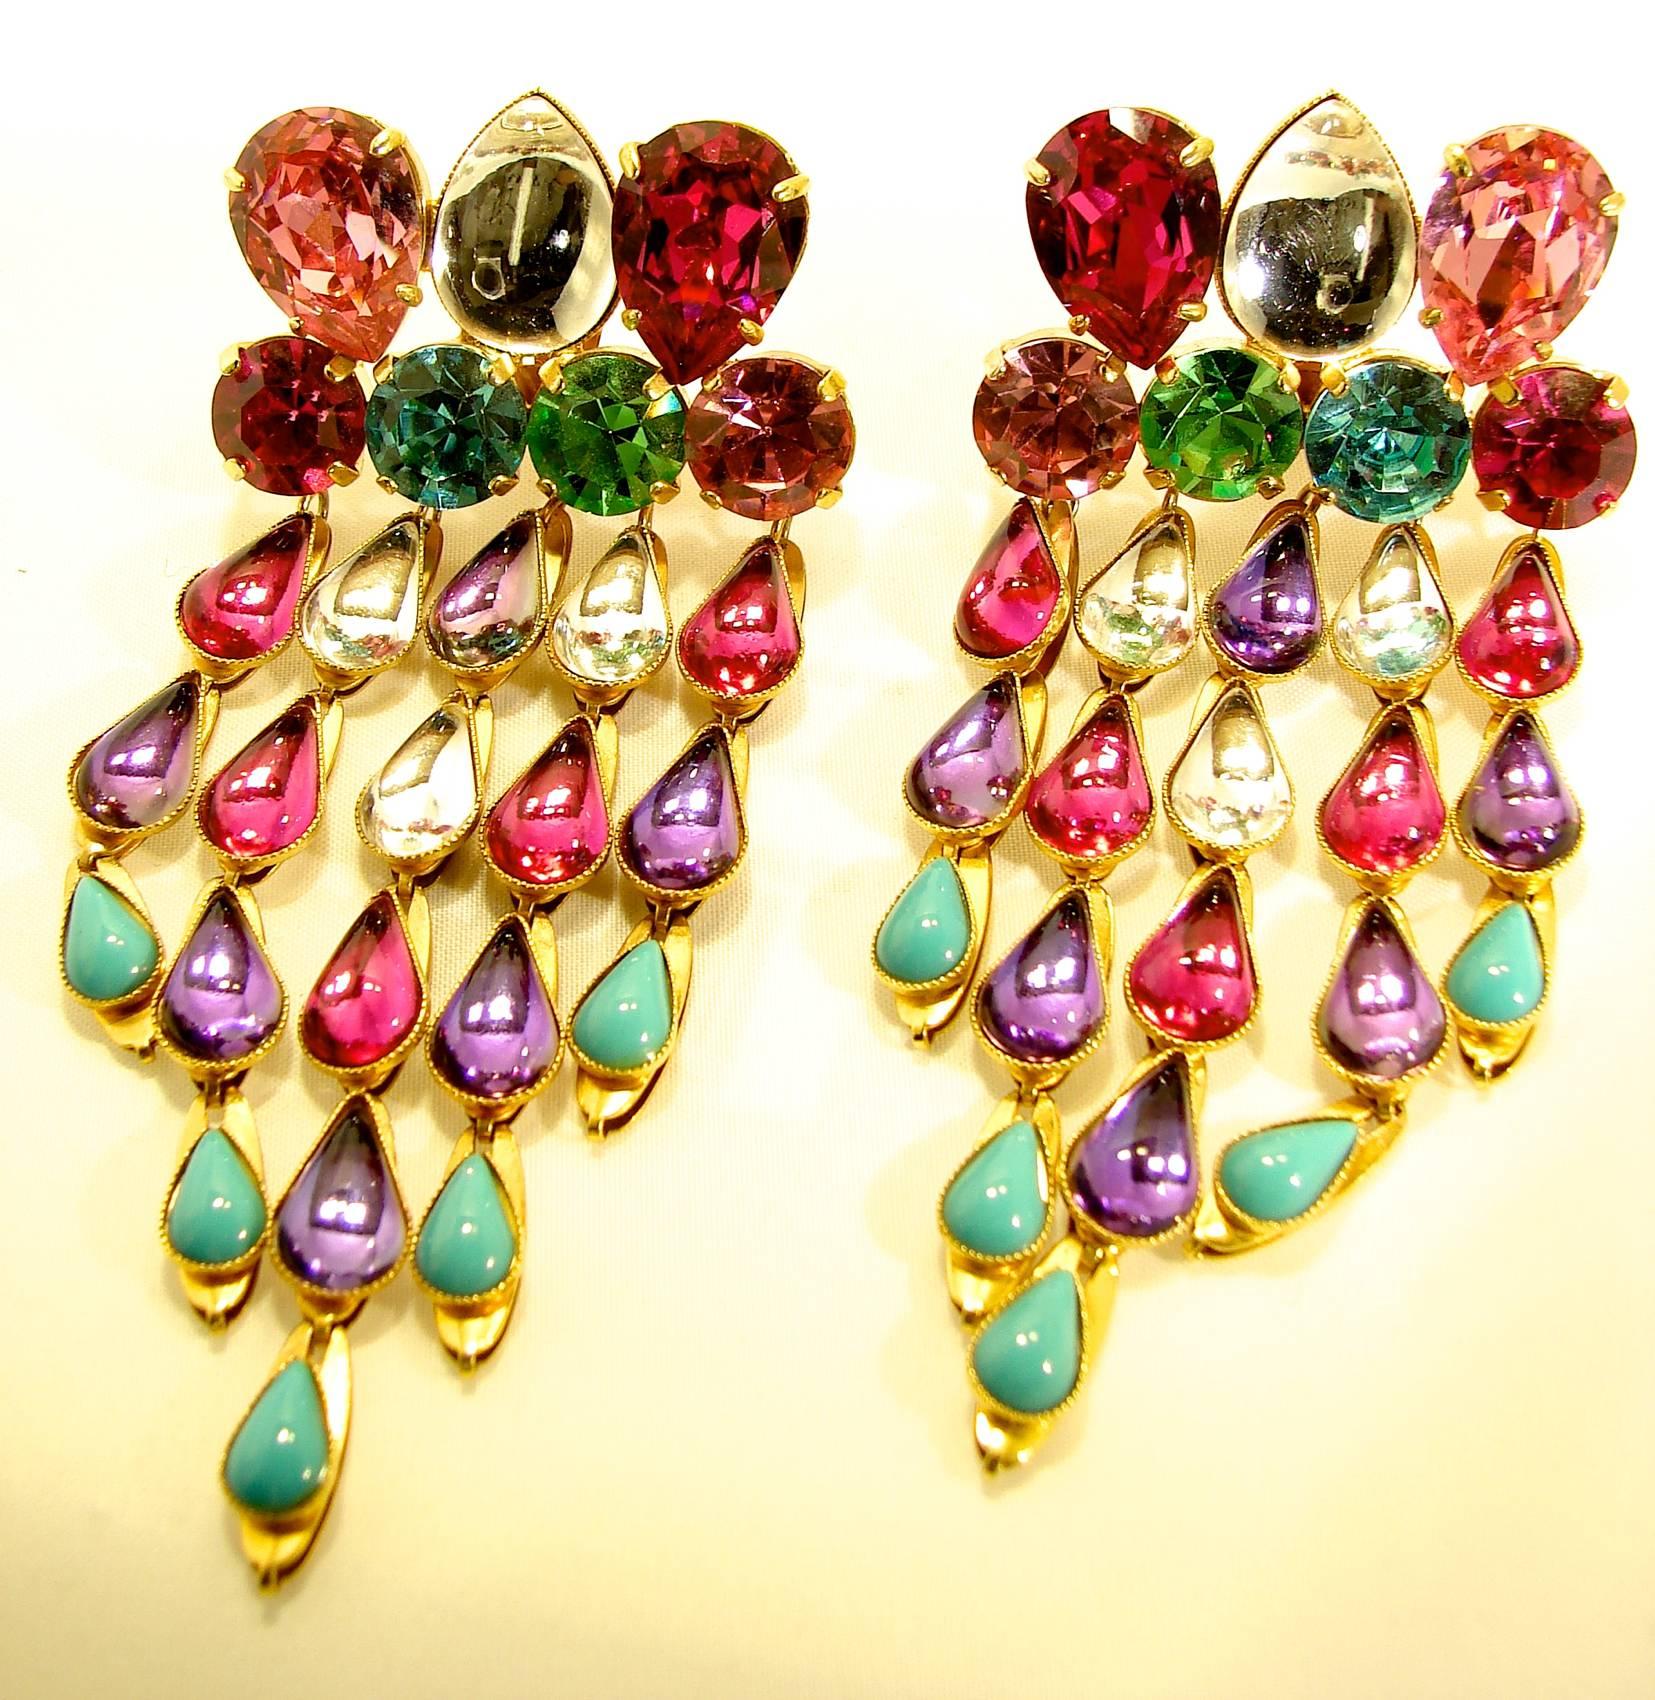 Clip style earrings circa late 1970s for Yves Saint Laurent's Rive Gauche line feature a row of sparkling rhinestones and glass cabochons, with dangling strands of glass tear drops in shades of turquoise, rose pink, amethyst and white.
This